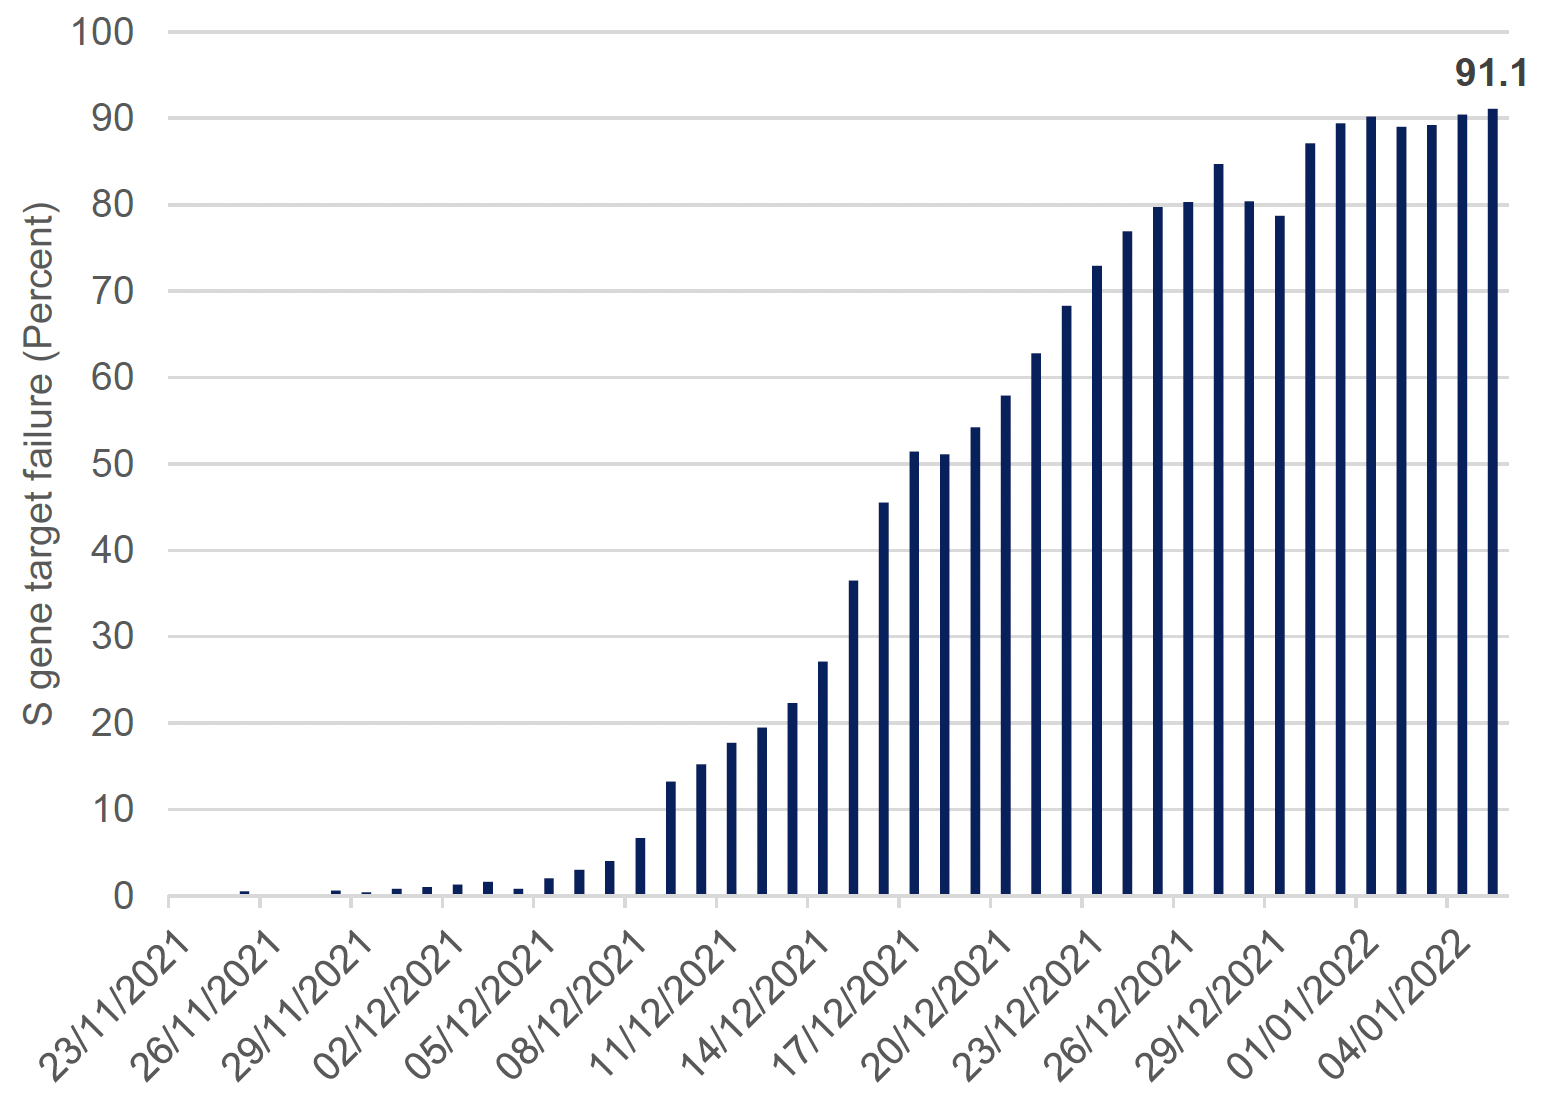 This column chart shows the percentage of positive cases going through the Pillar 2 Lighthouse lab that have the S gene target failure (SGTF) used to identify the Omicron variant, for each day since 23 November 2021. The proportion of SGTF cases have increased exponentially over this time period, from 0% on 23 November to 91.1% on 5 January.